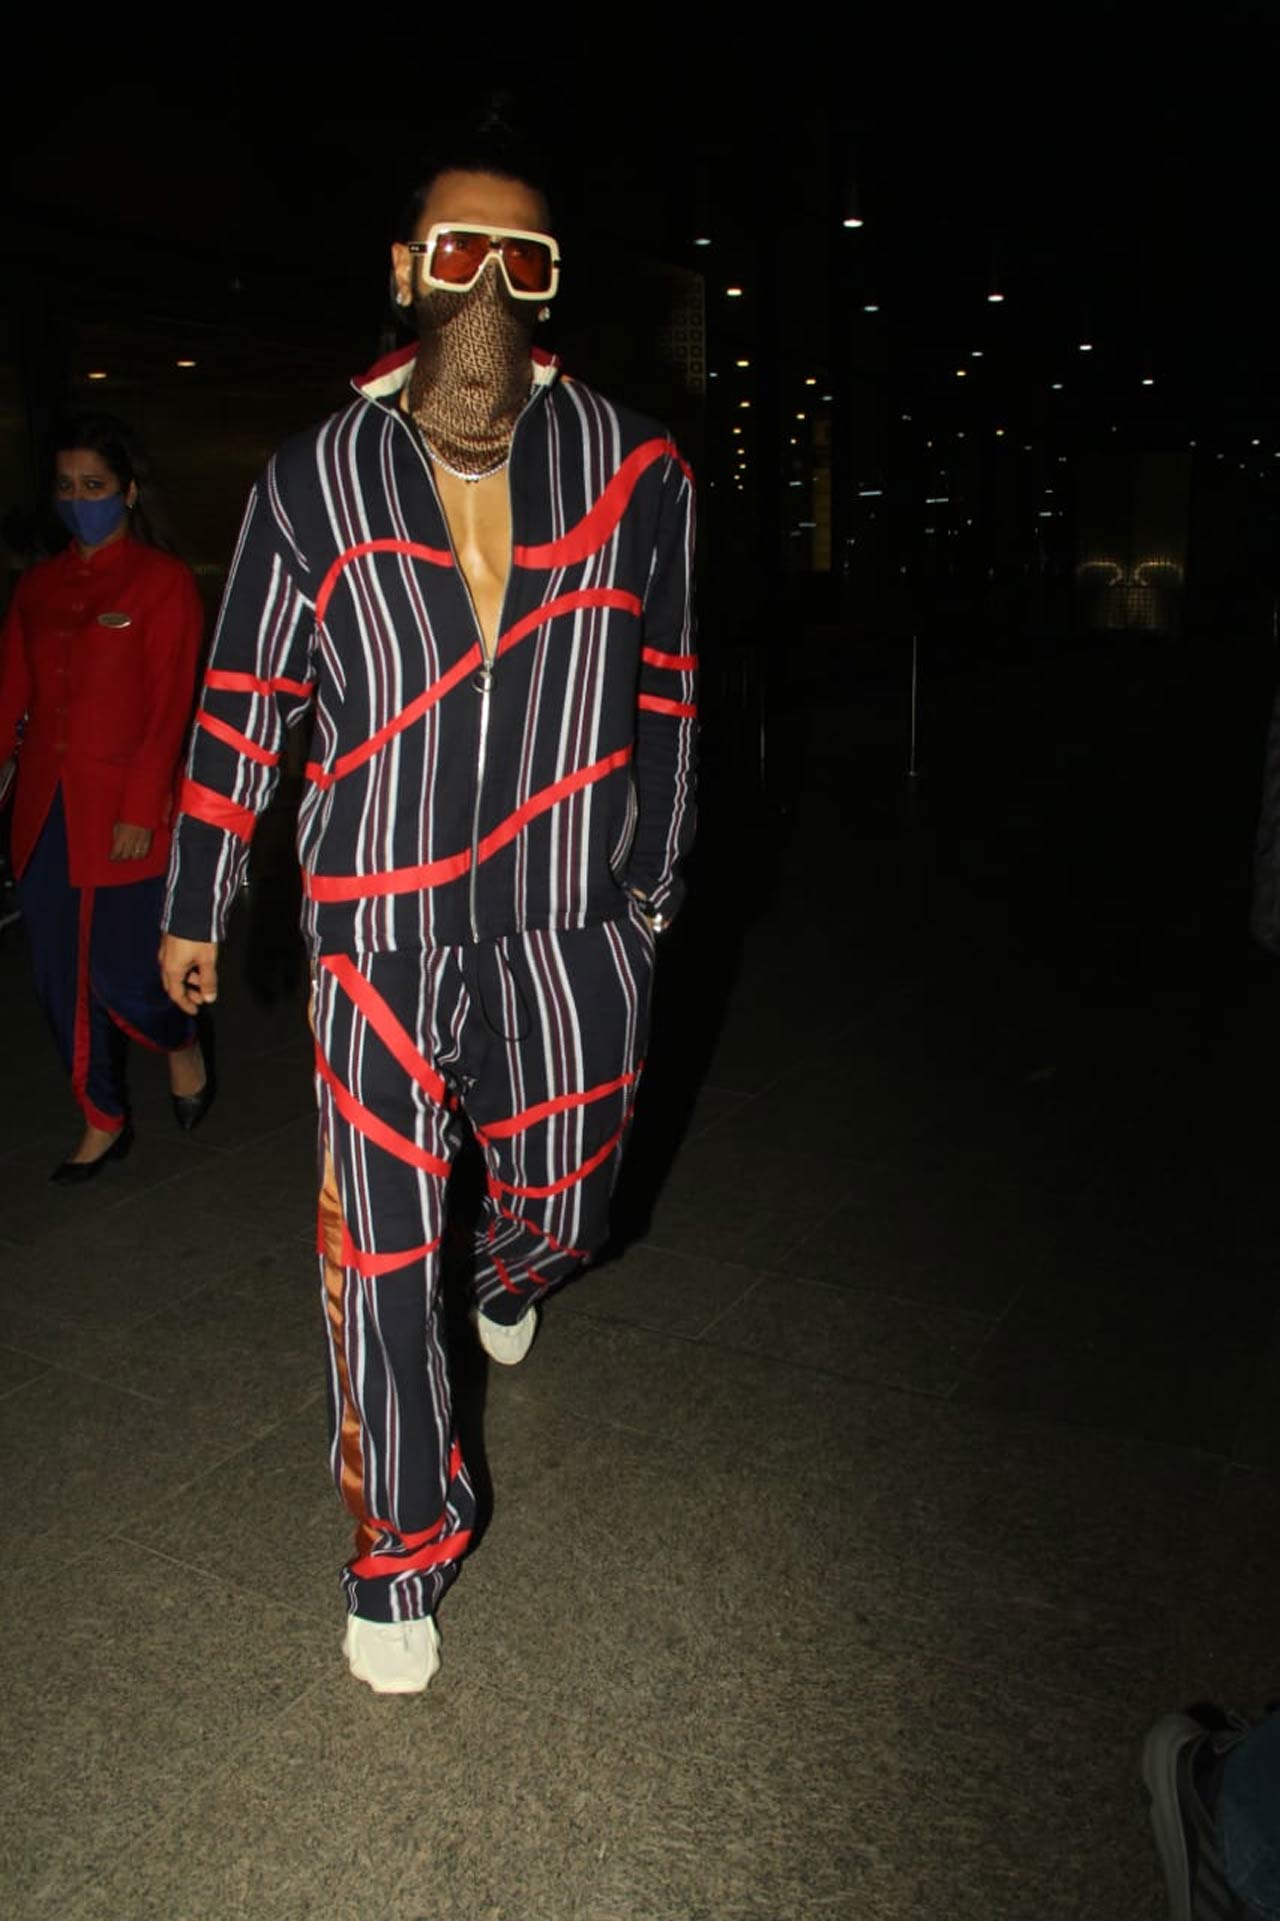 Ranveer Singh yet again flaunted his whacky side when snapped by the shutterbugs at the Mumbai airport. The actor sported a trendy tracksuit for his outing, and we can't get our eyes off from his funky airport look.